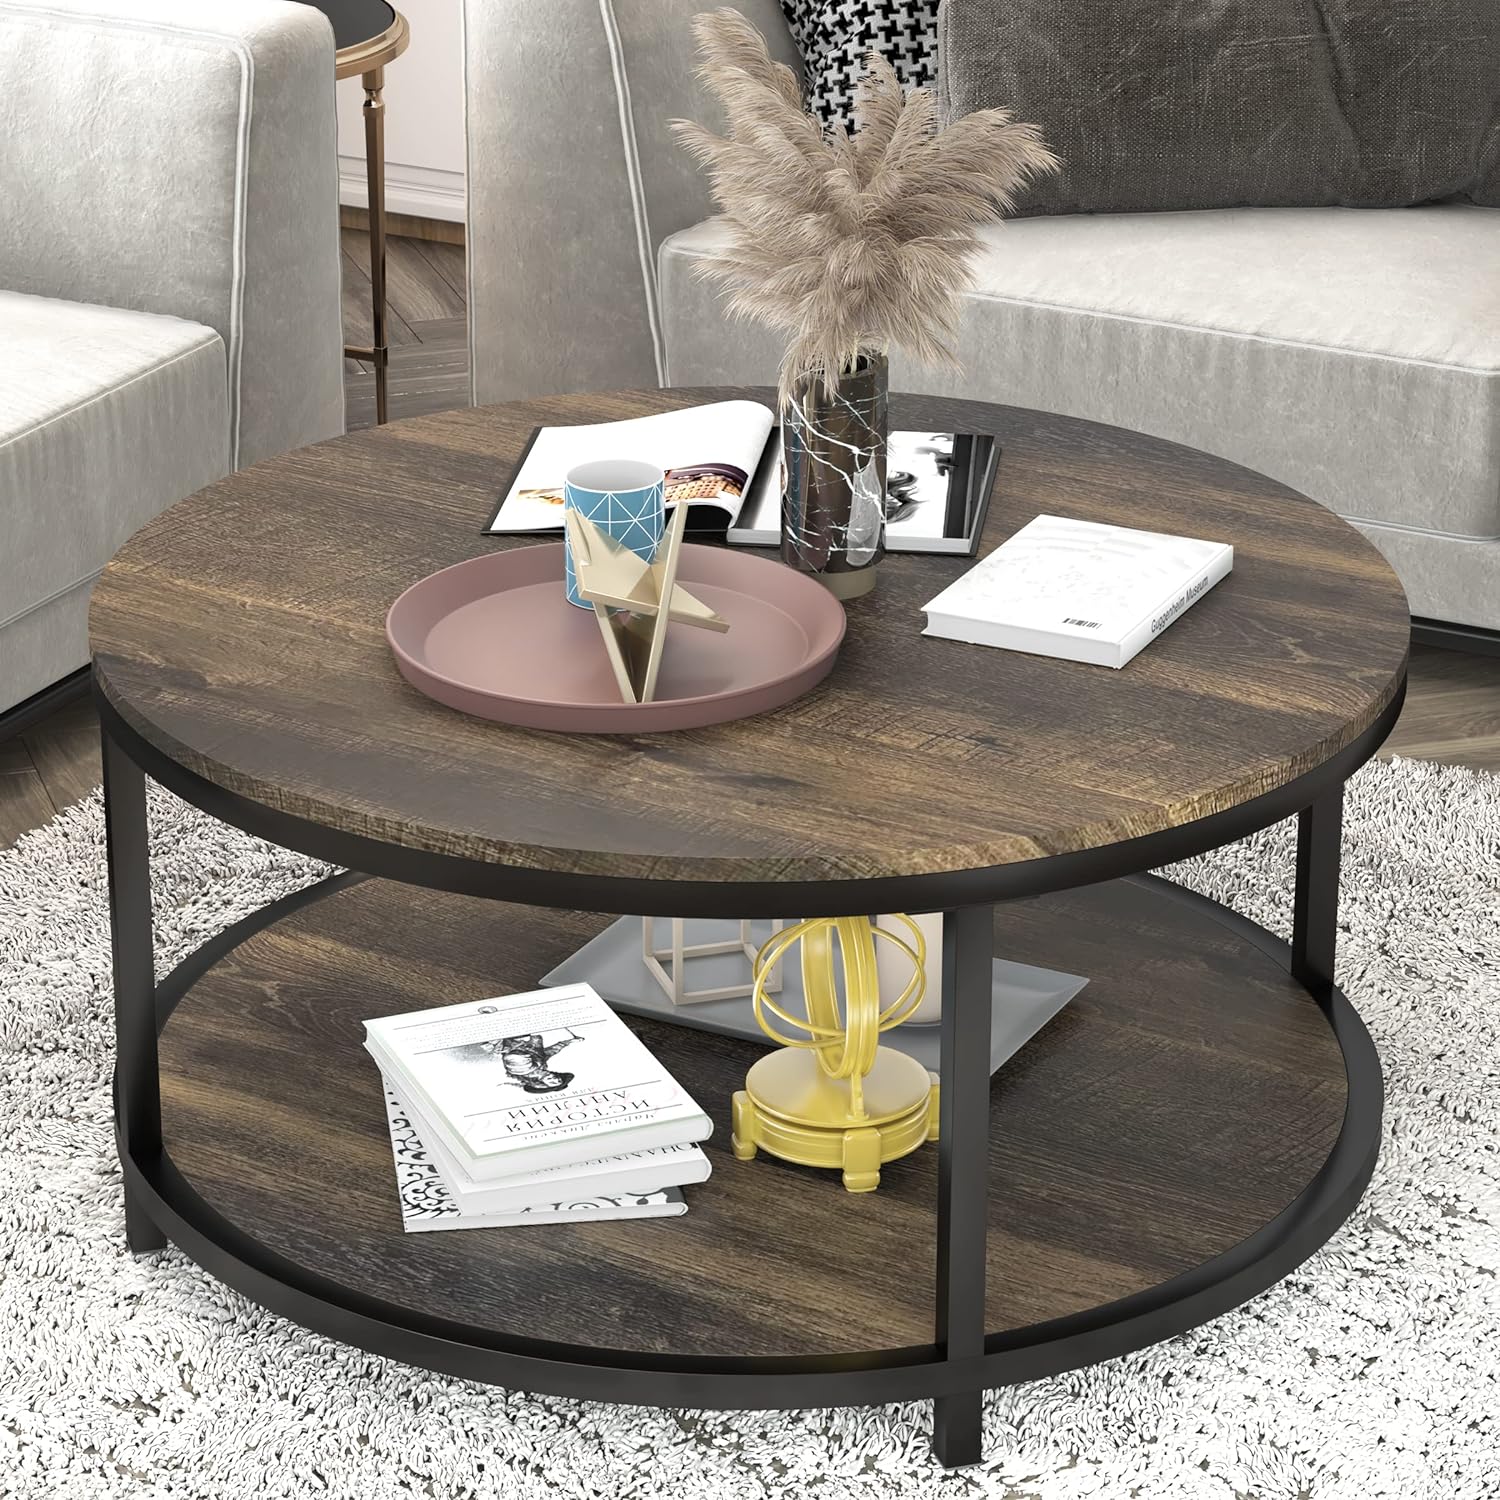 NSdirect 36 Inches Round Coffee Table Rustic Wooden Surface Top & Stu